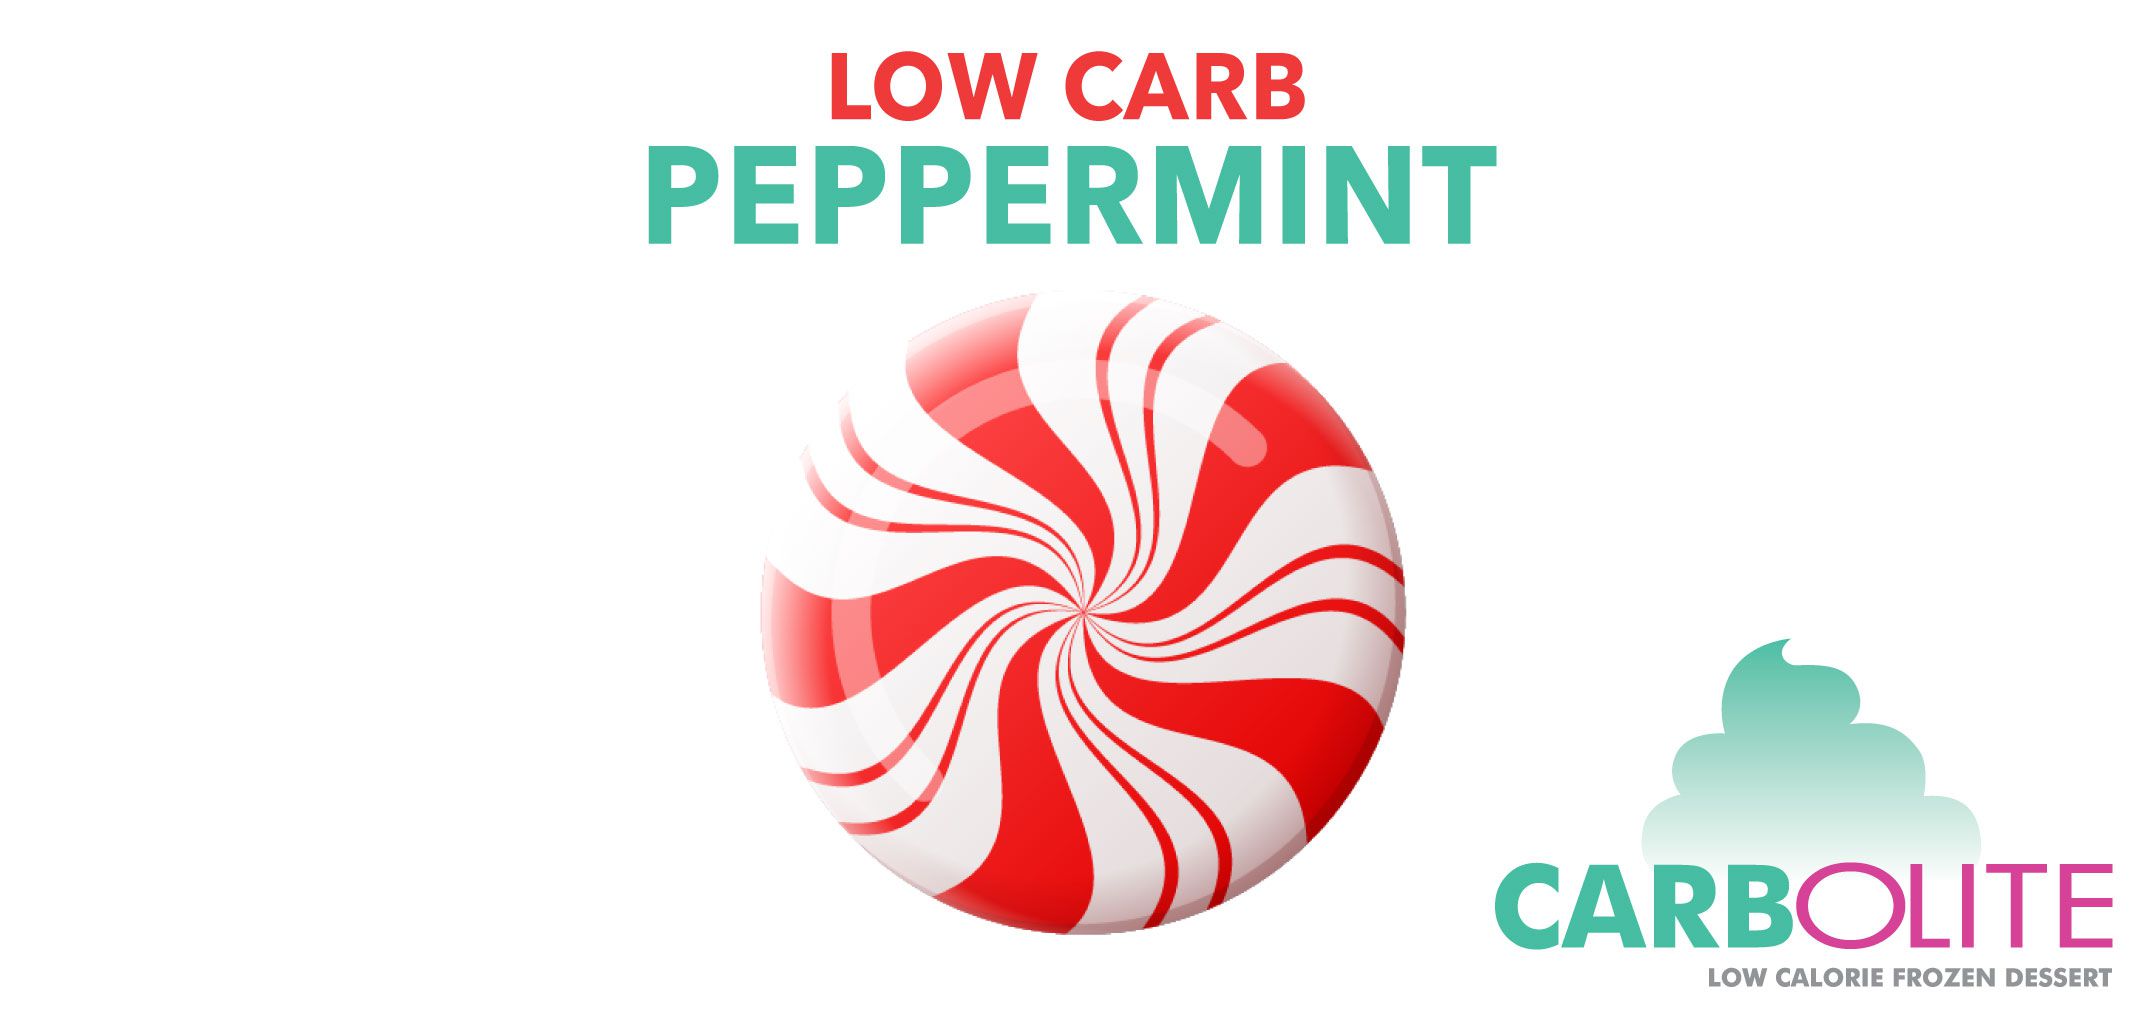 carbolite low carb no sugar added peppermint label image